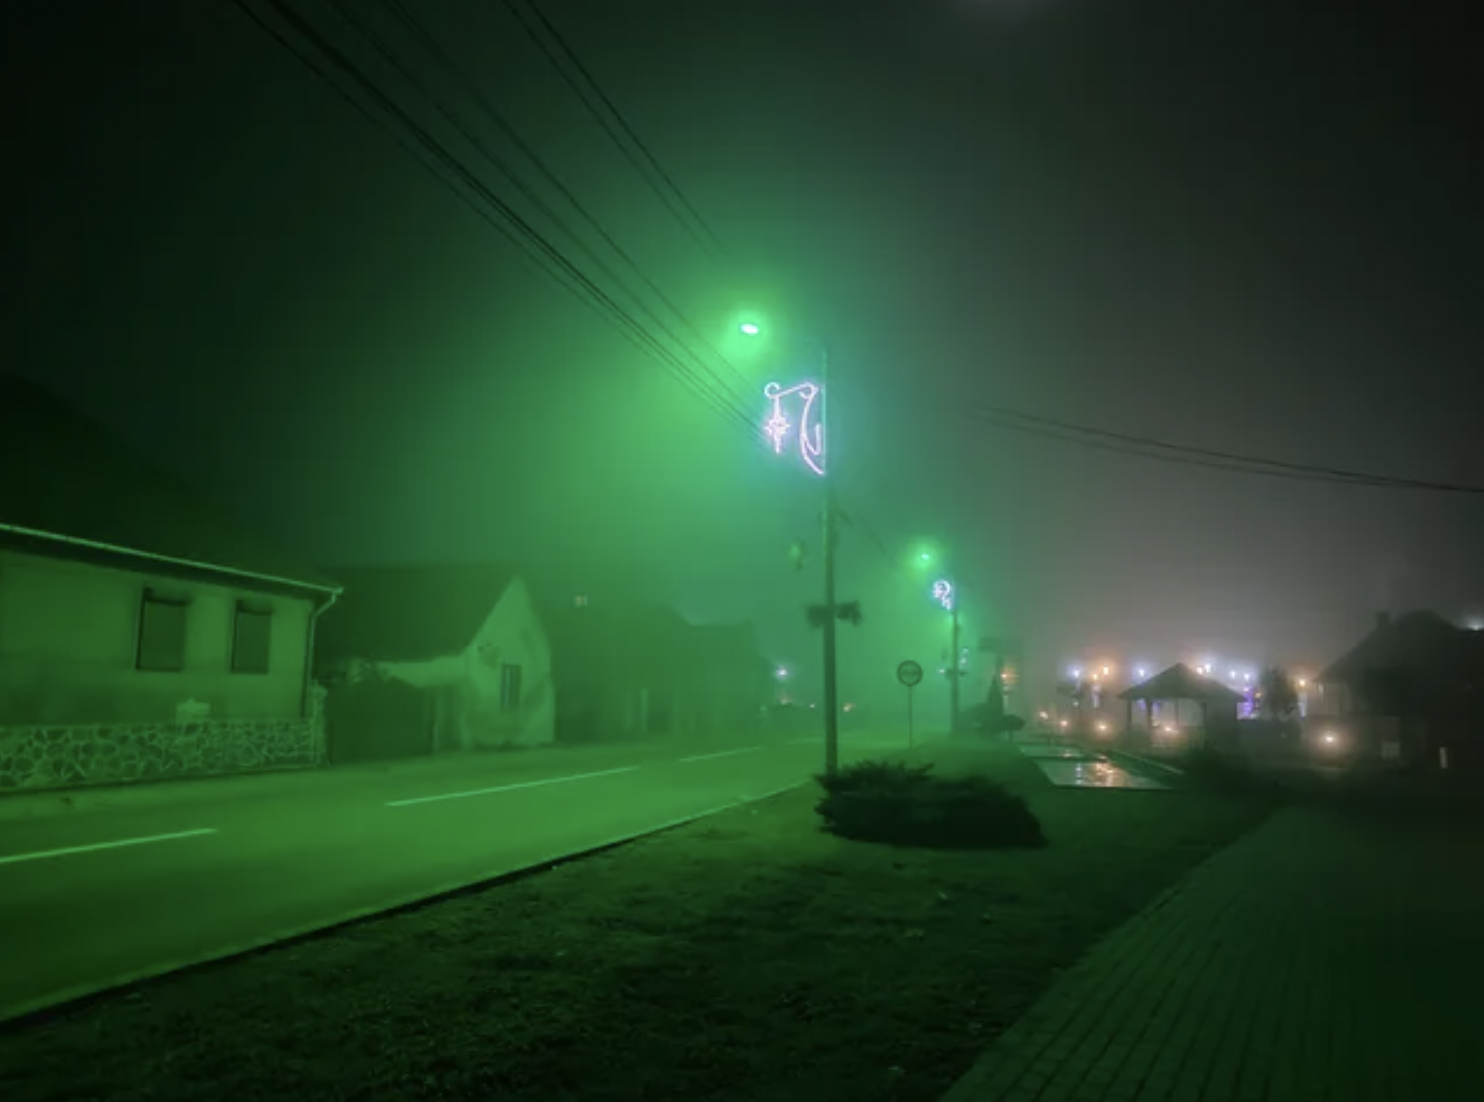 The streetlights in my town are green.